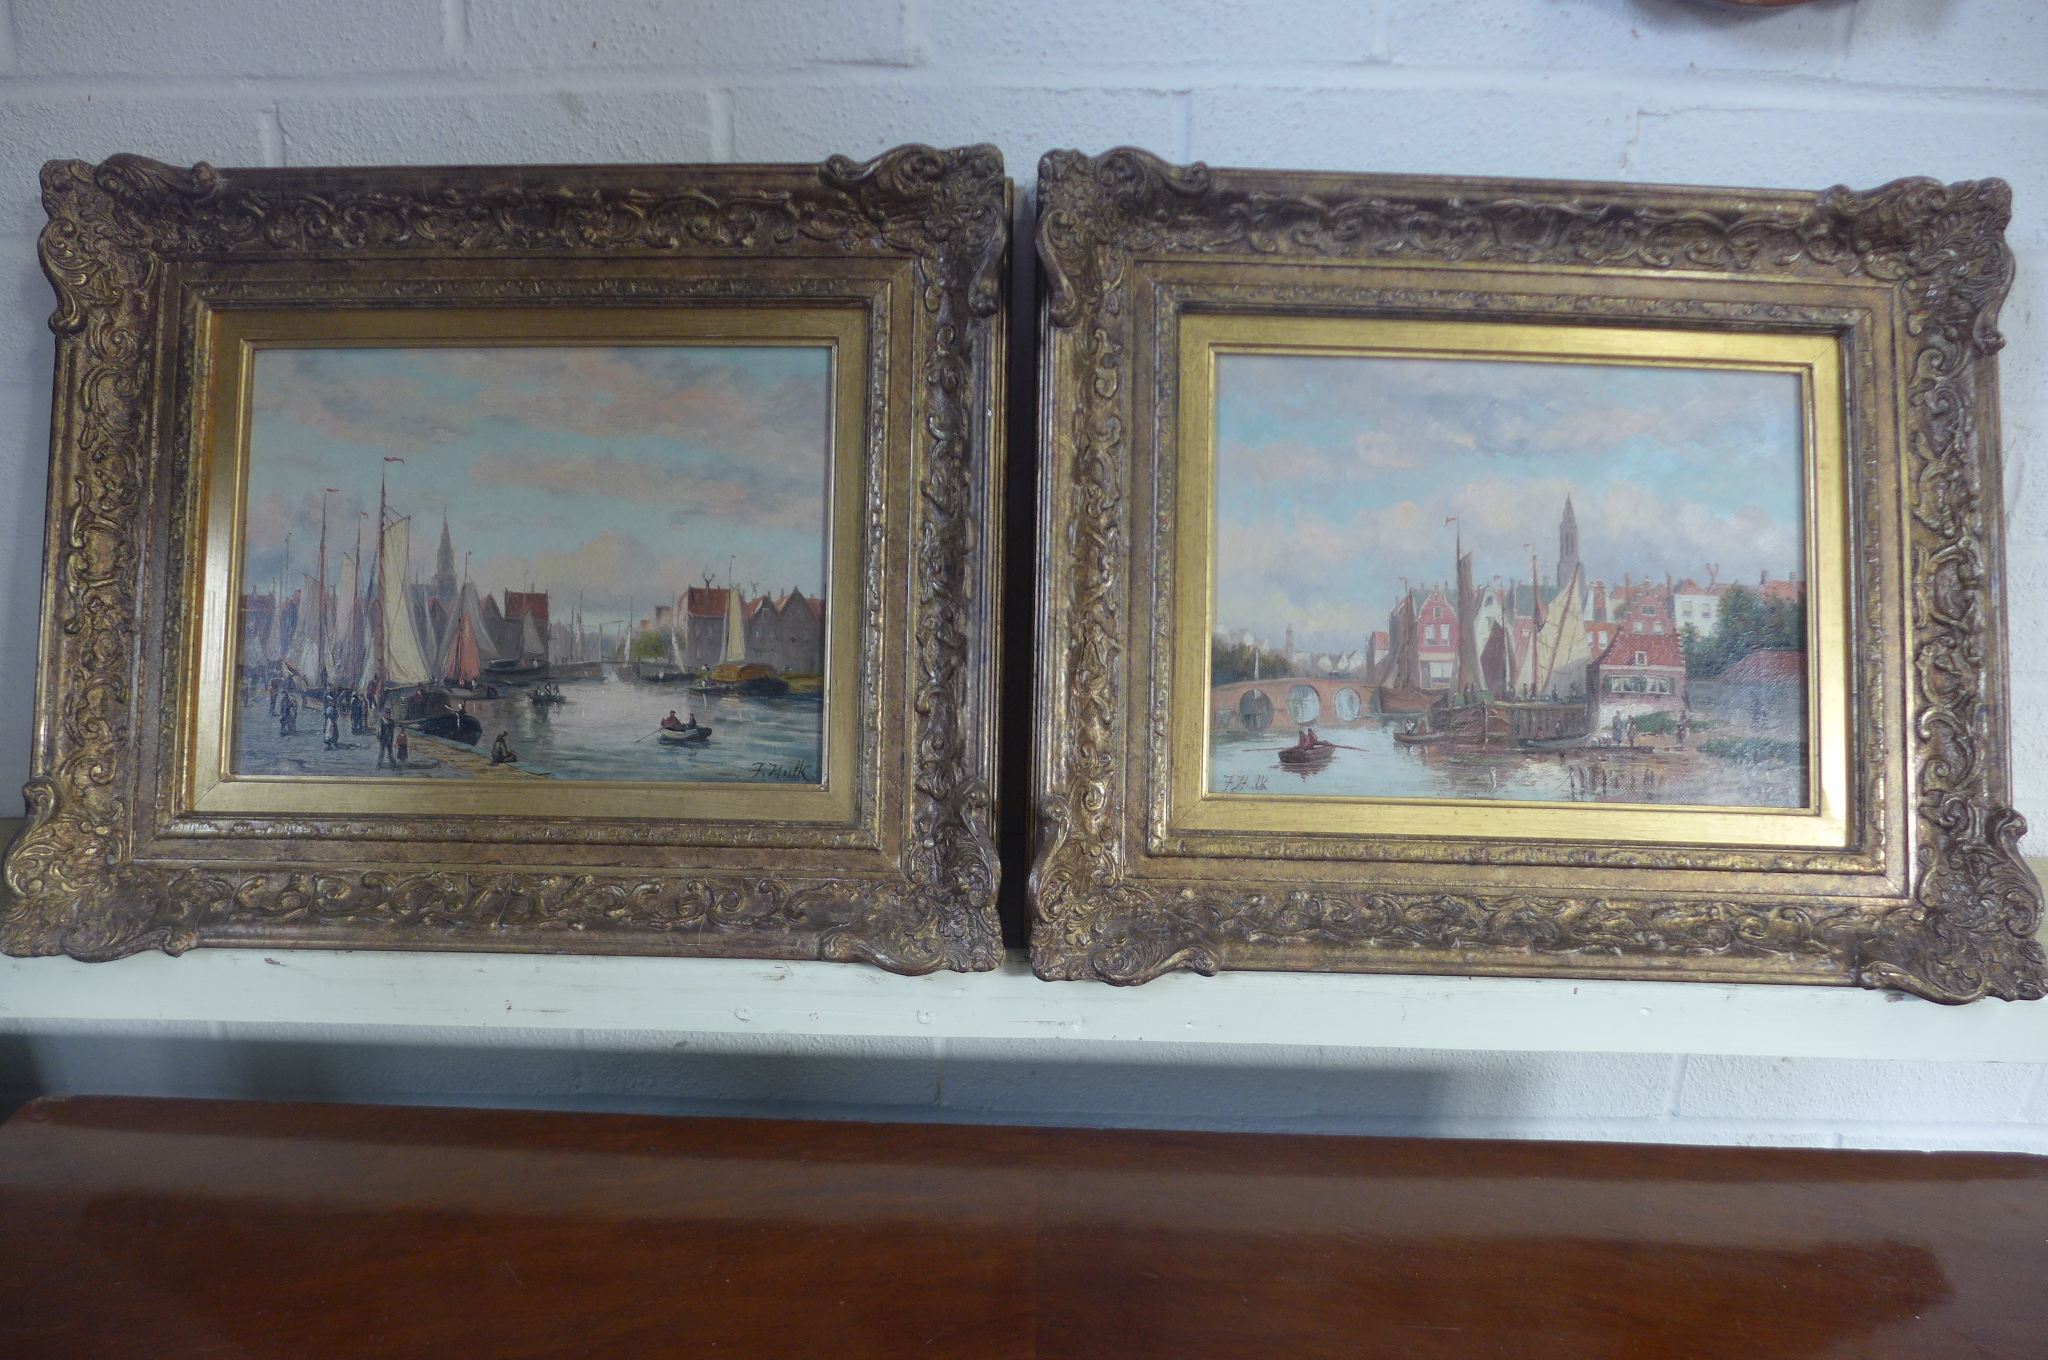 A pair of oil on canvas paintings by Johannes Frederick Hulk jnr, 1855-1913 of Hamburg and on the